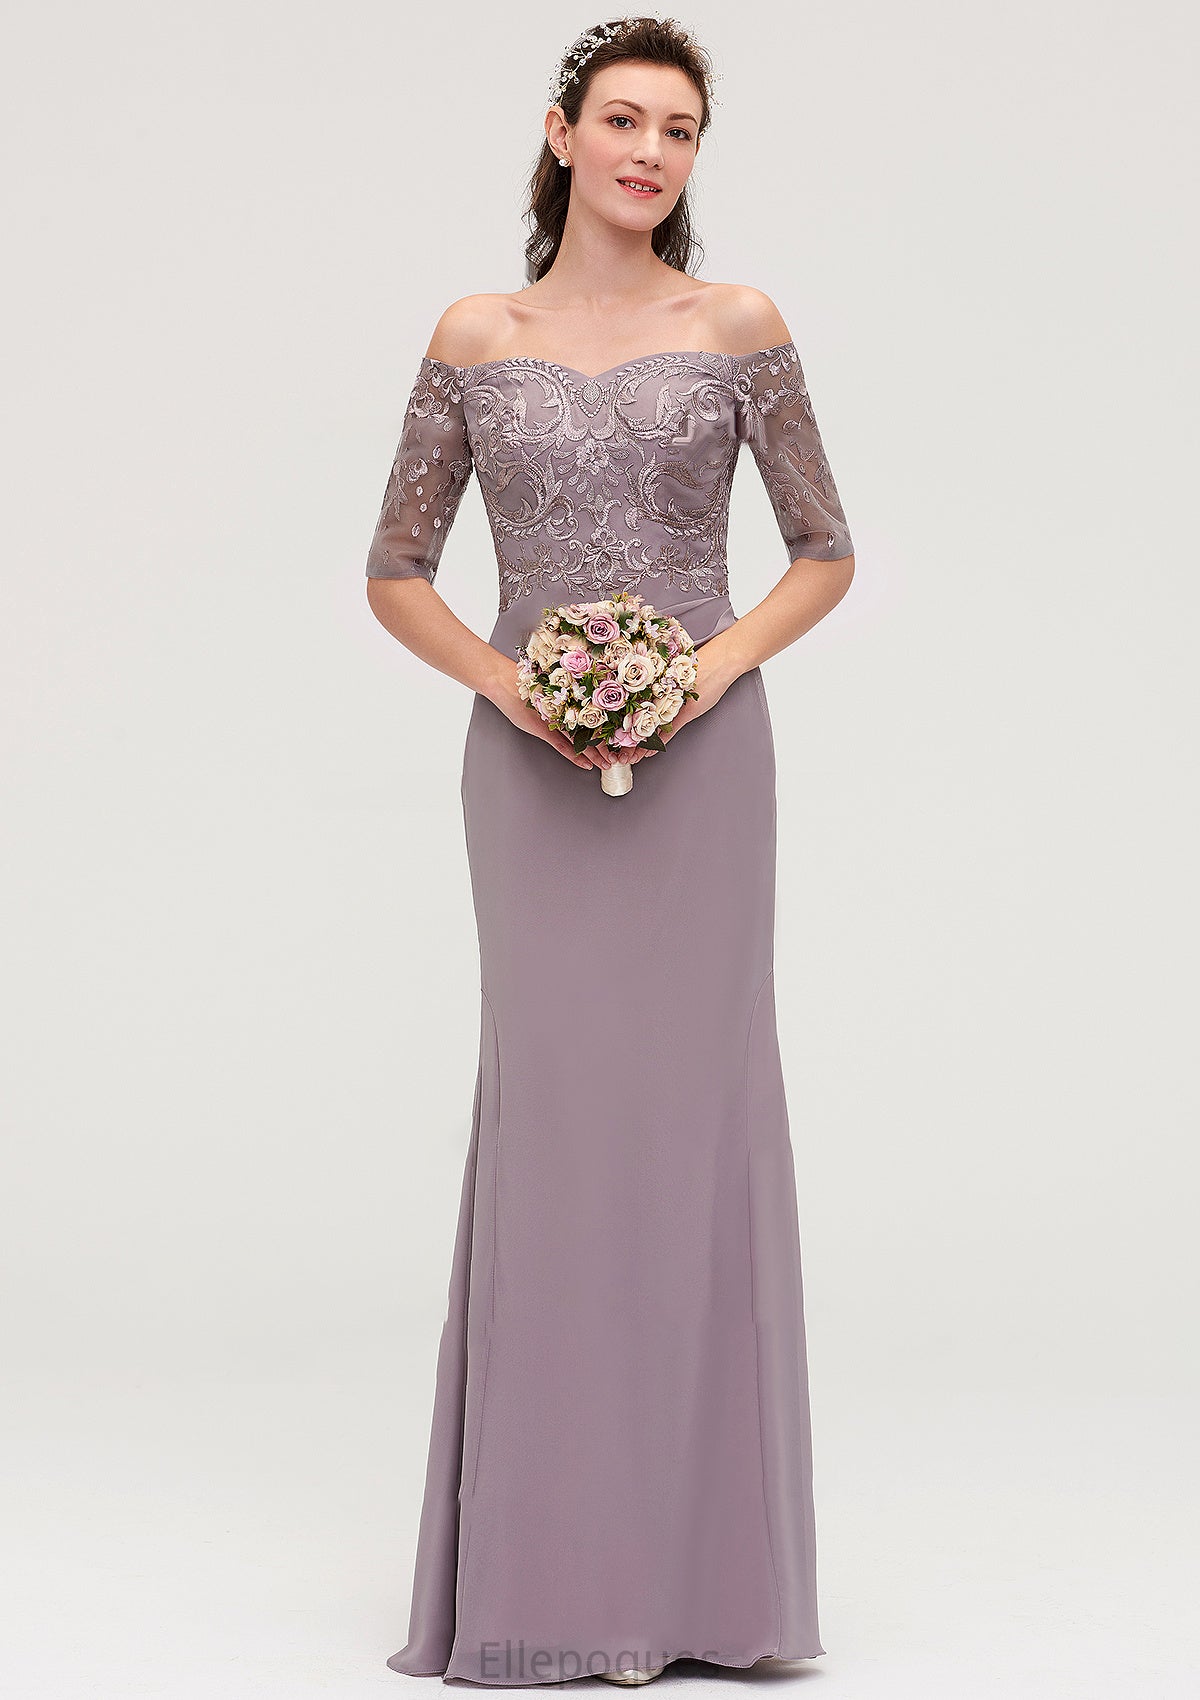 Off-the-Shoulder Half Sleeve Sheath/Column Long/Floor-Length Chiffon Bridesmaid Dresseses With Appliqued Coral HOP0025458